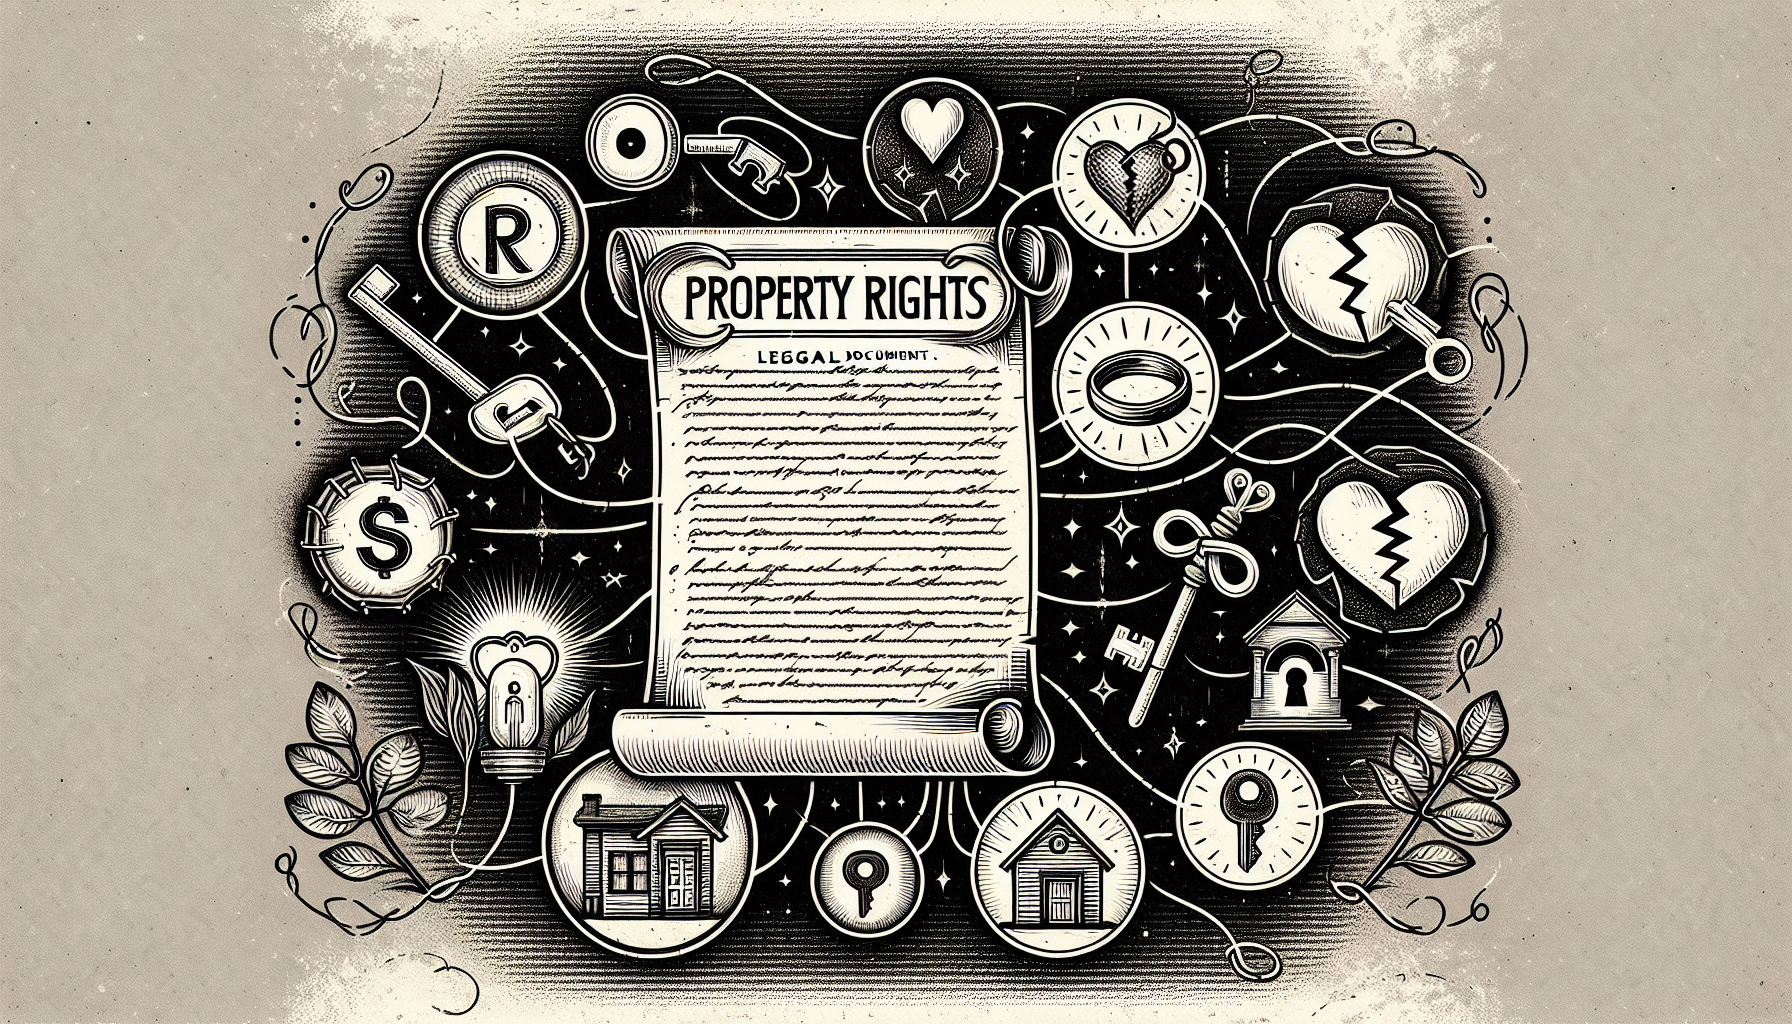 Illustration of a legal document with the title 'Property Rights' surrounded by relevant legal symbols